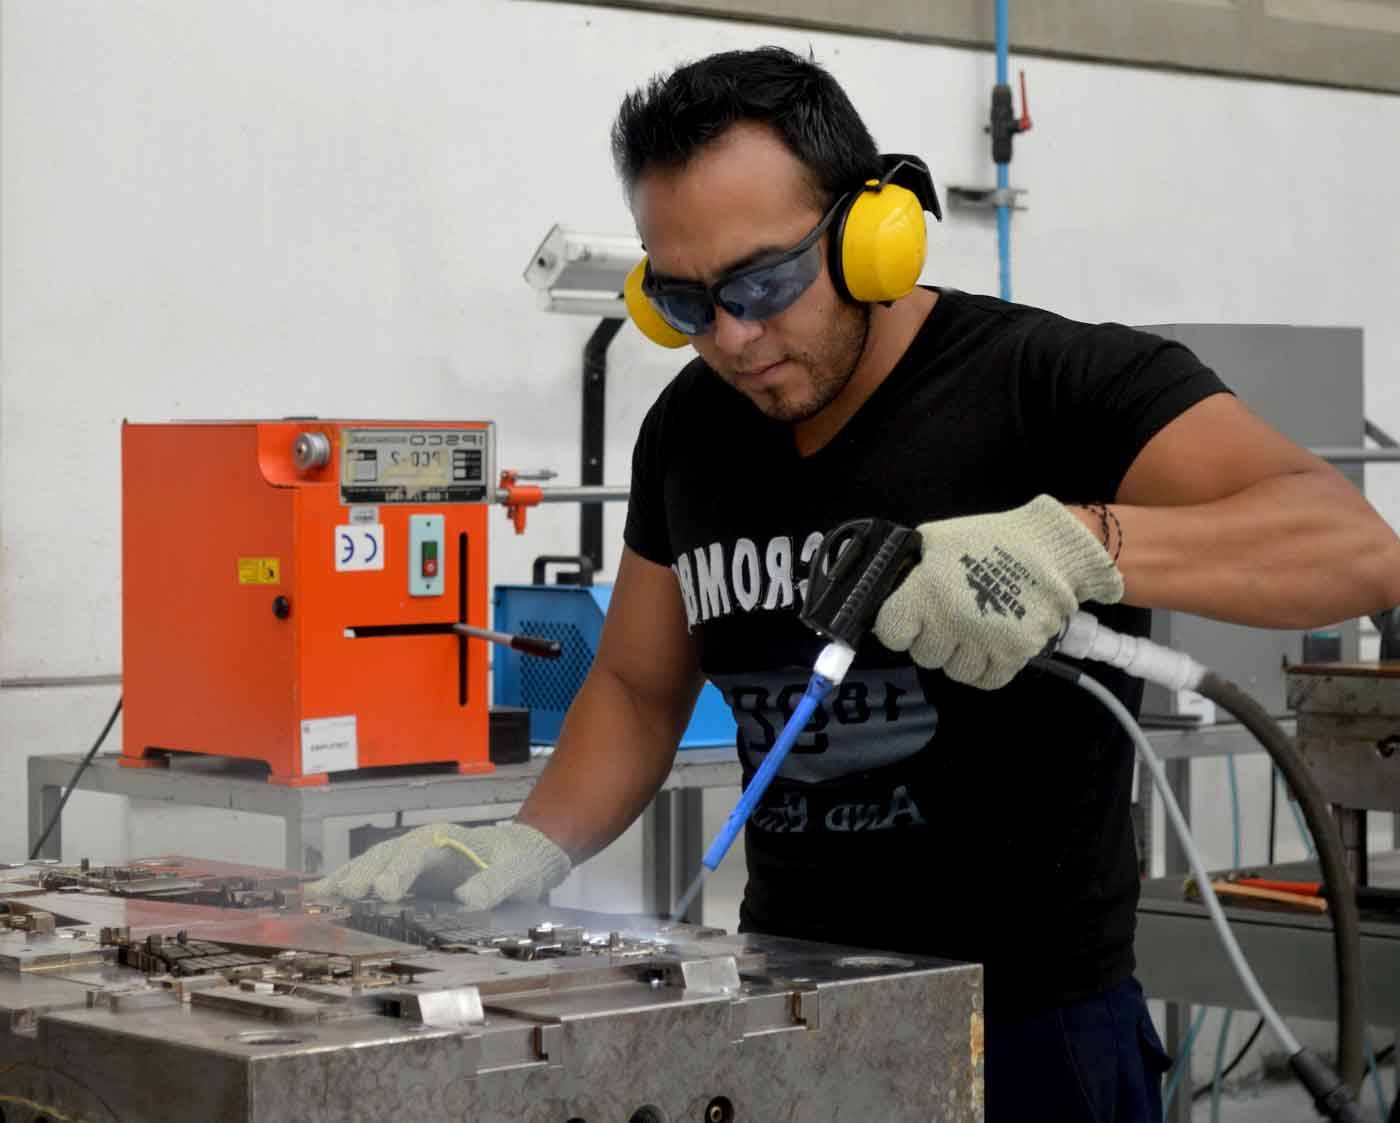 Like Mario Palacios in the Tool Shop, all employees work focused on achieving the main objective: customer satisfaction.